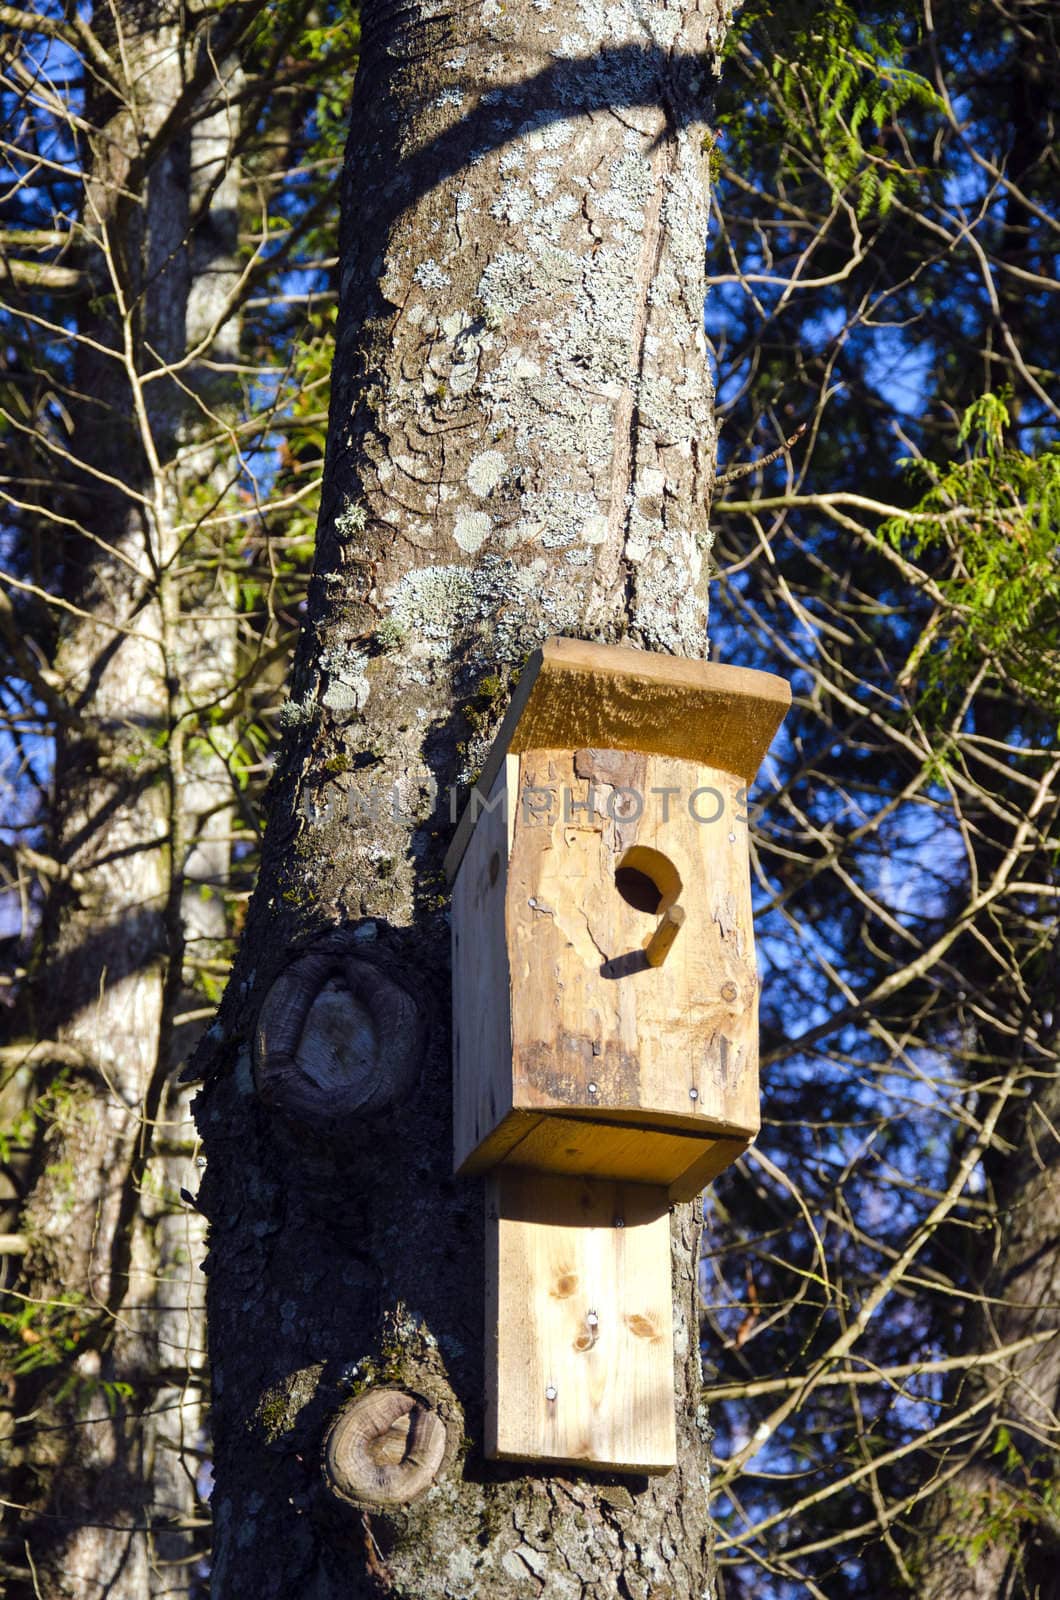 Newly nailed wooden bird nesting-box attached to tree trunk.